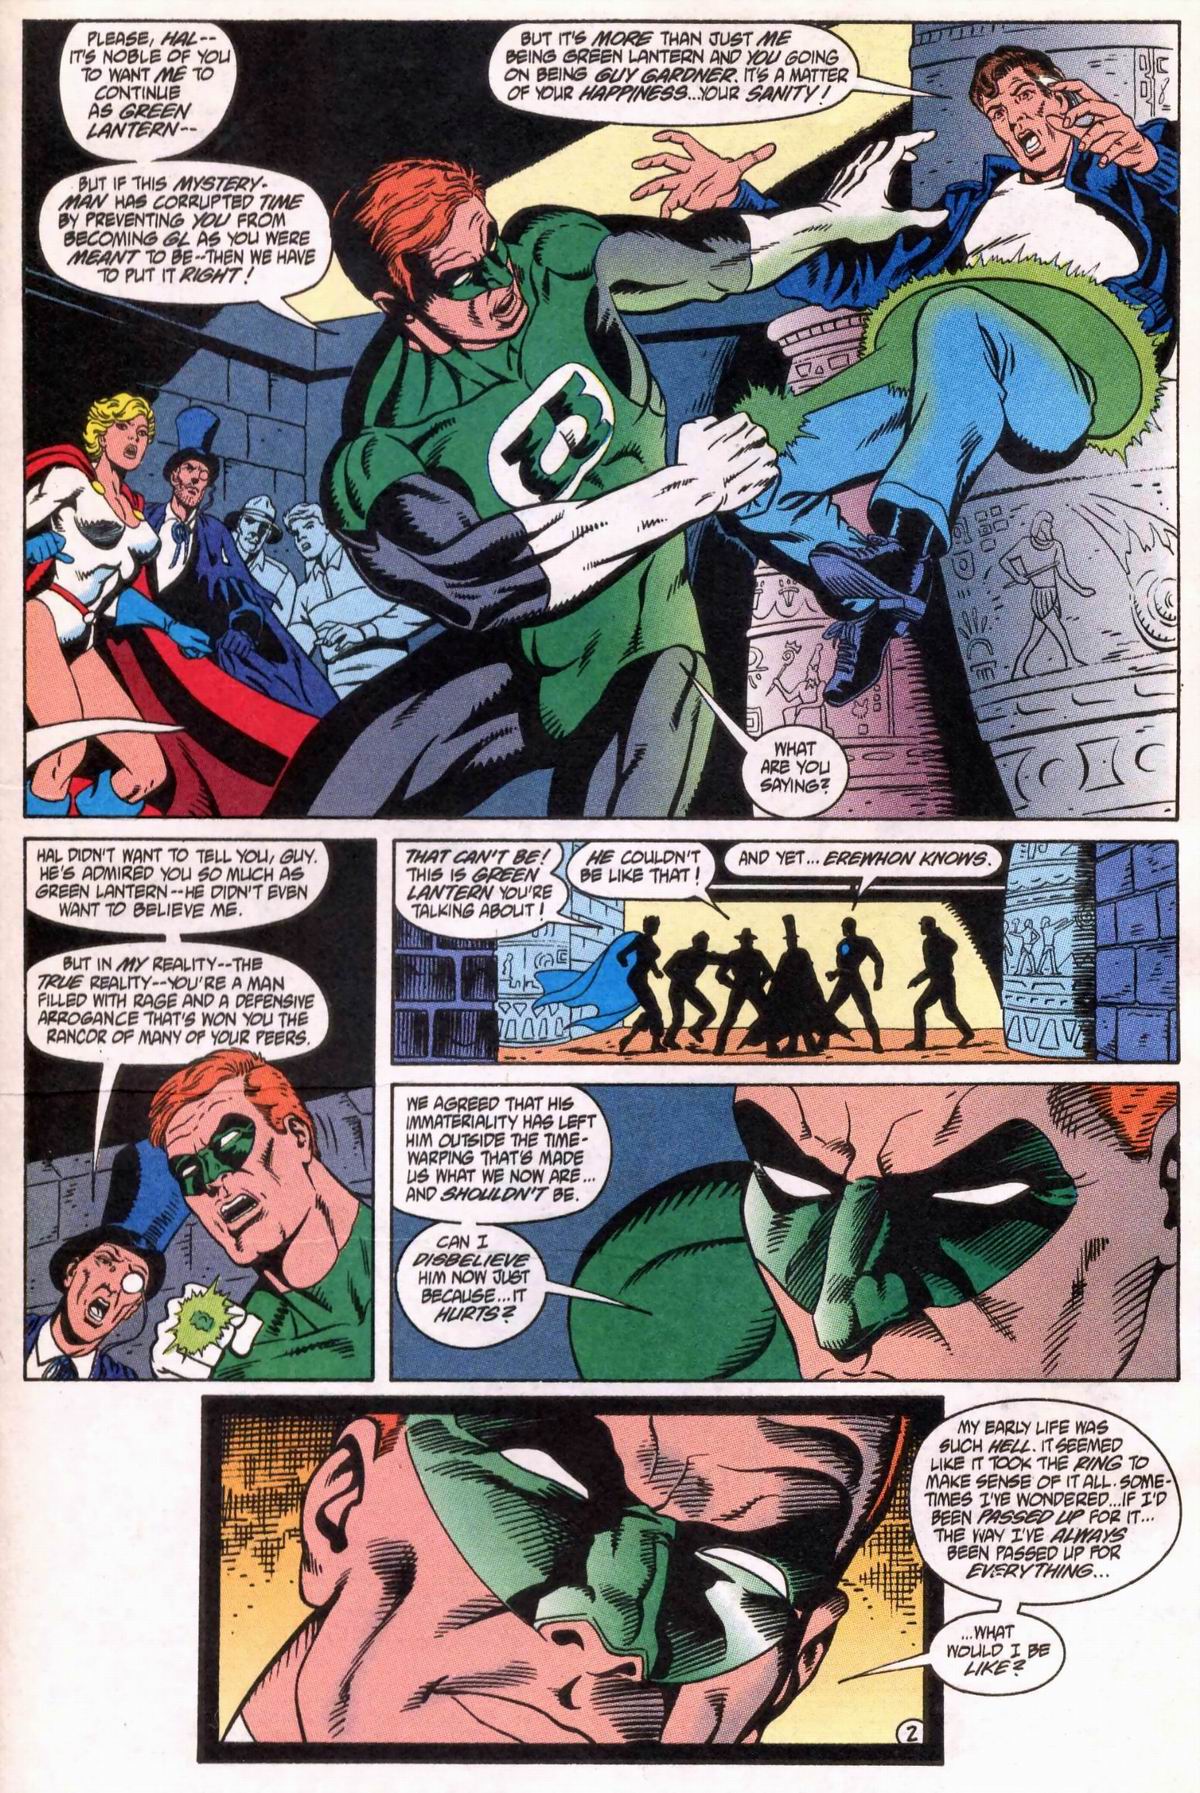 Justice League International (1993) 60 Page 2